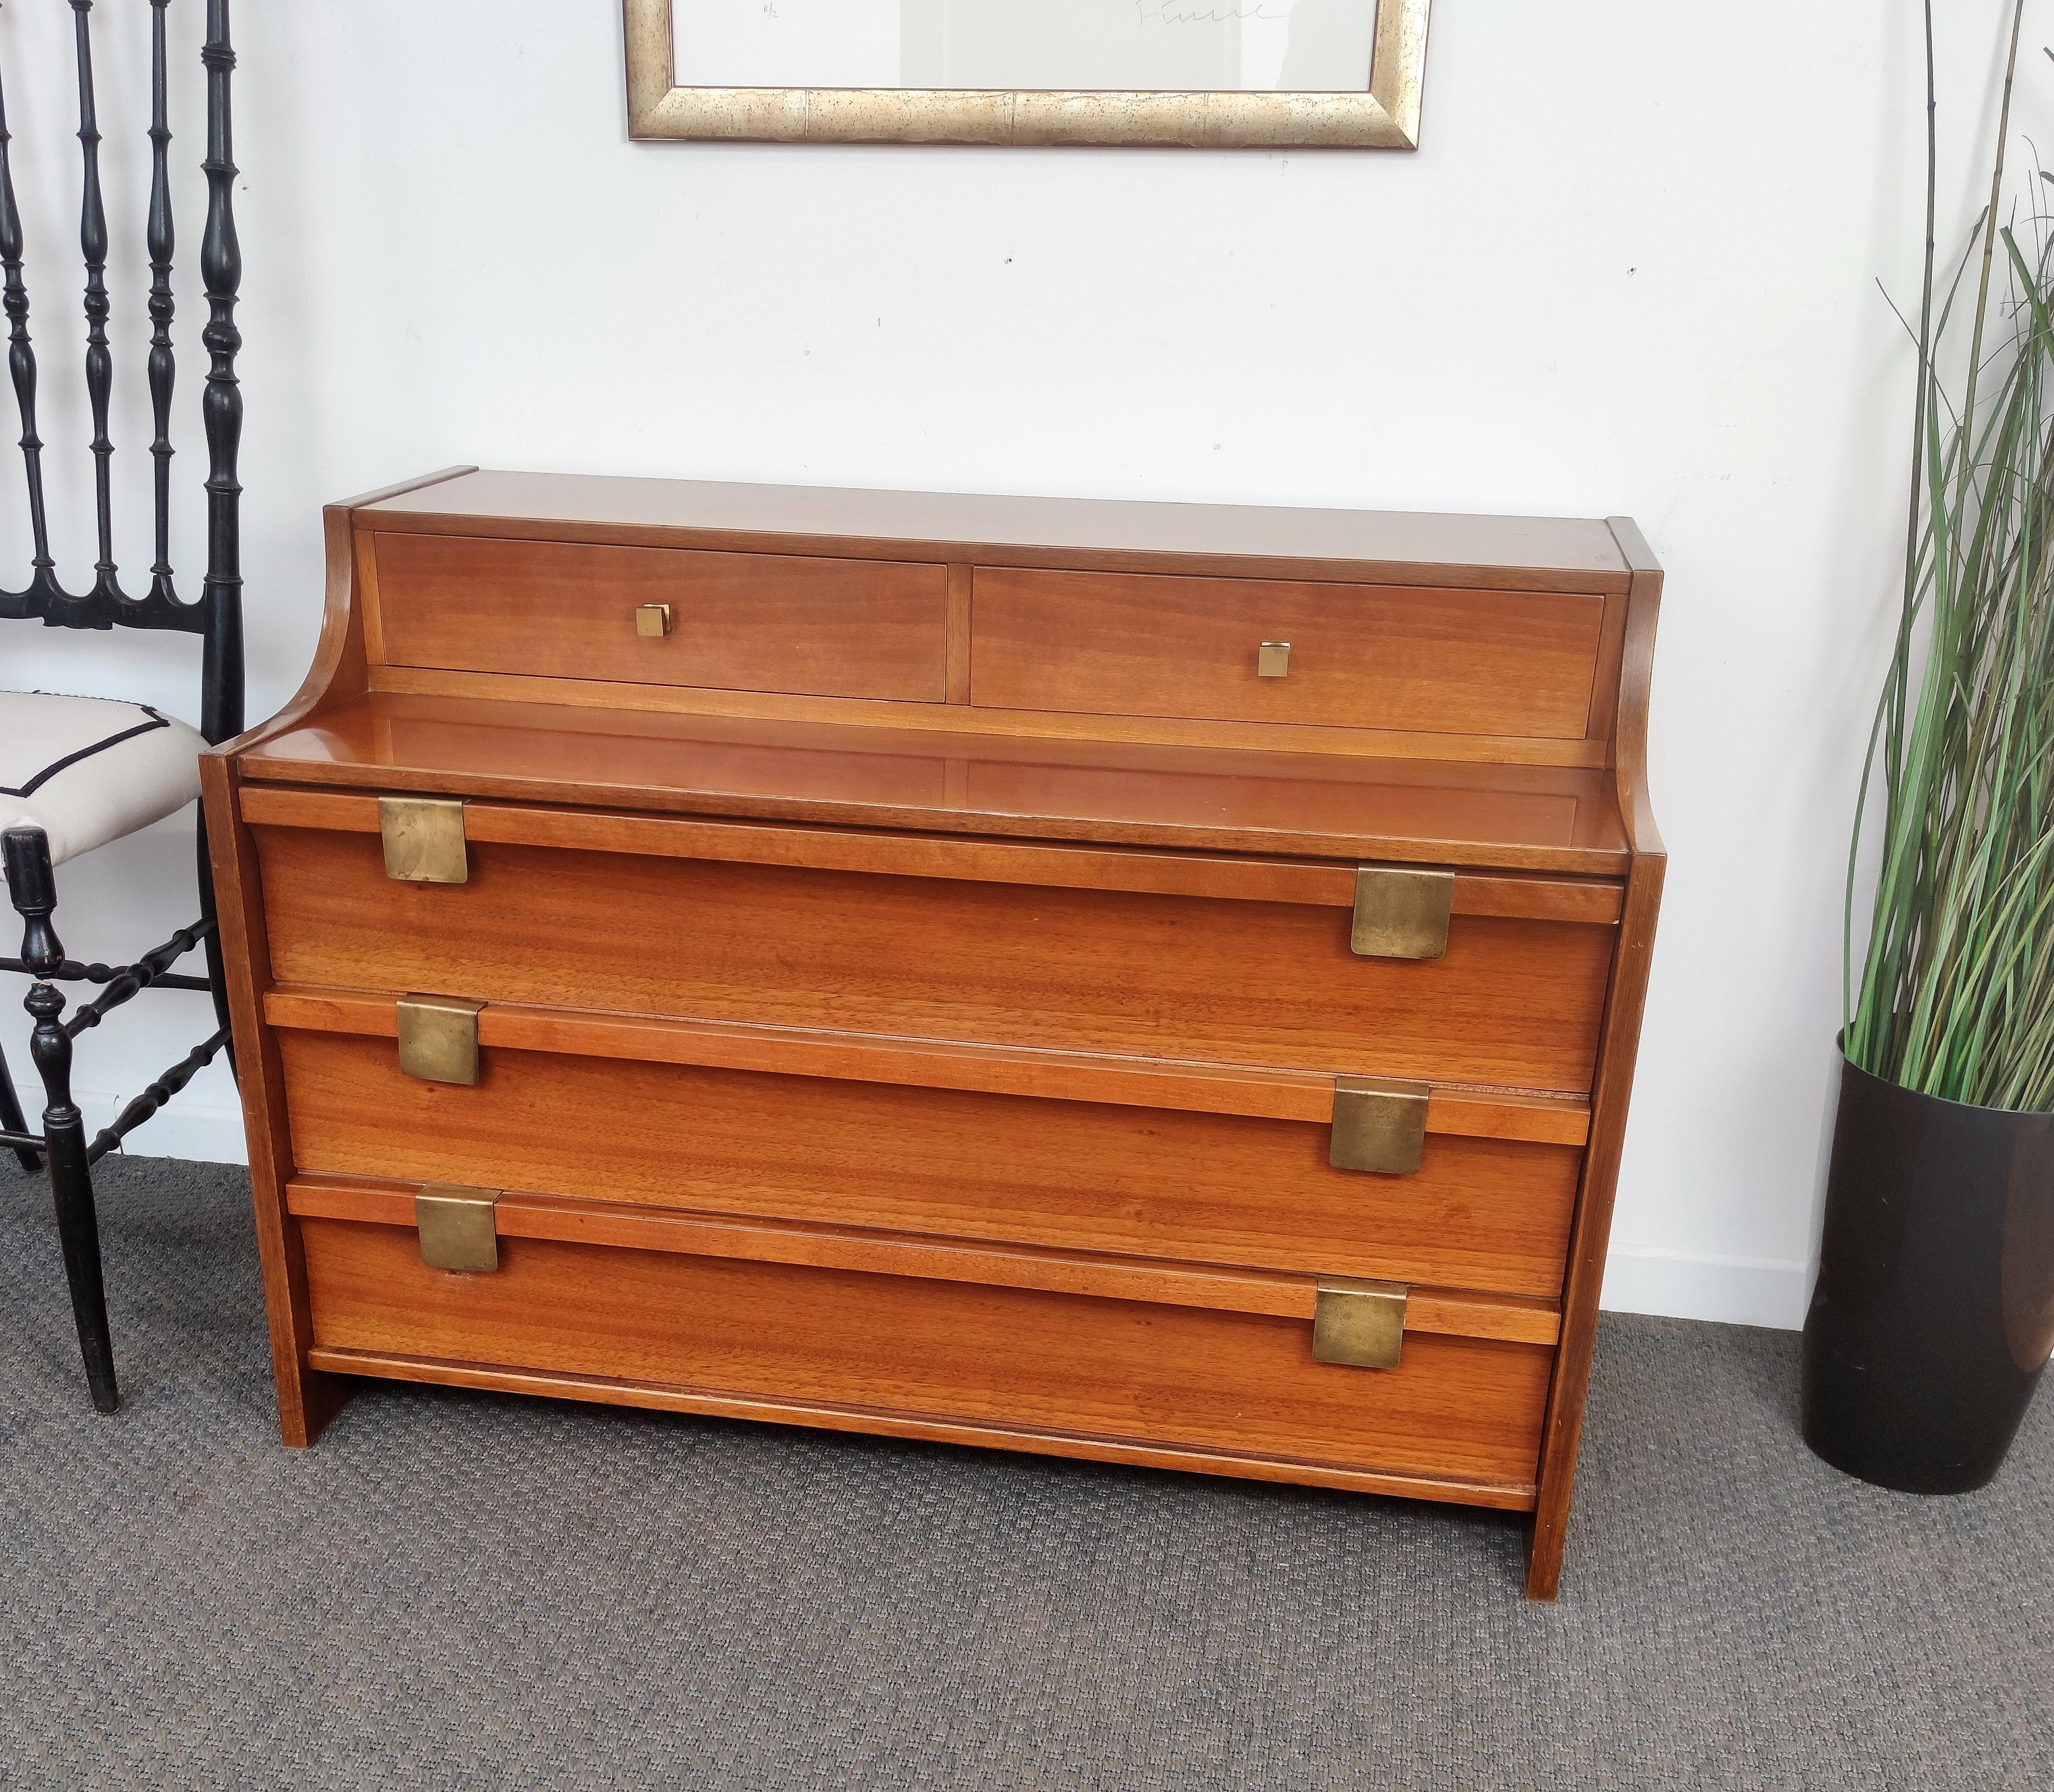 1960s Italian Mid-Century Modern Wood and Brass Commode Dresser Chest of Drawers For Sale 2